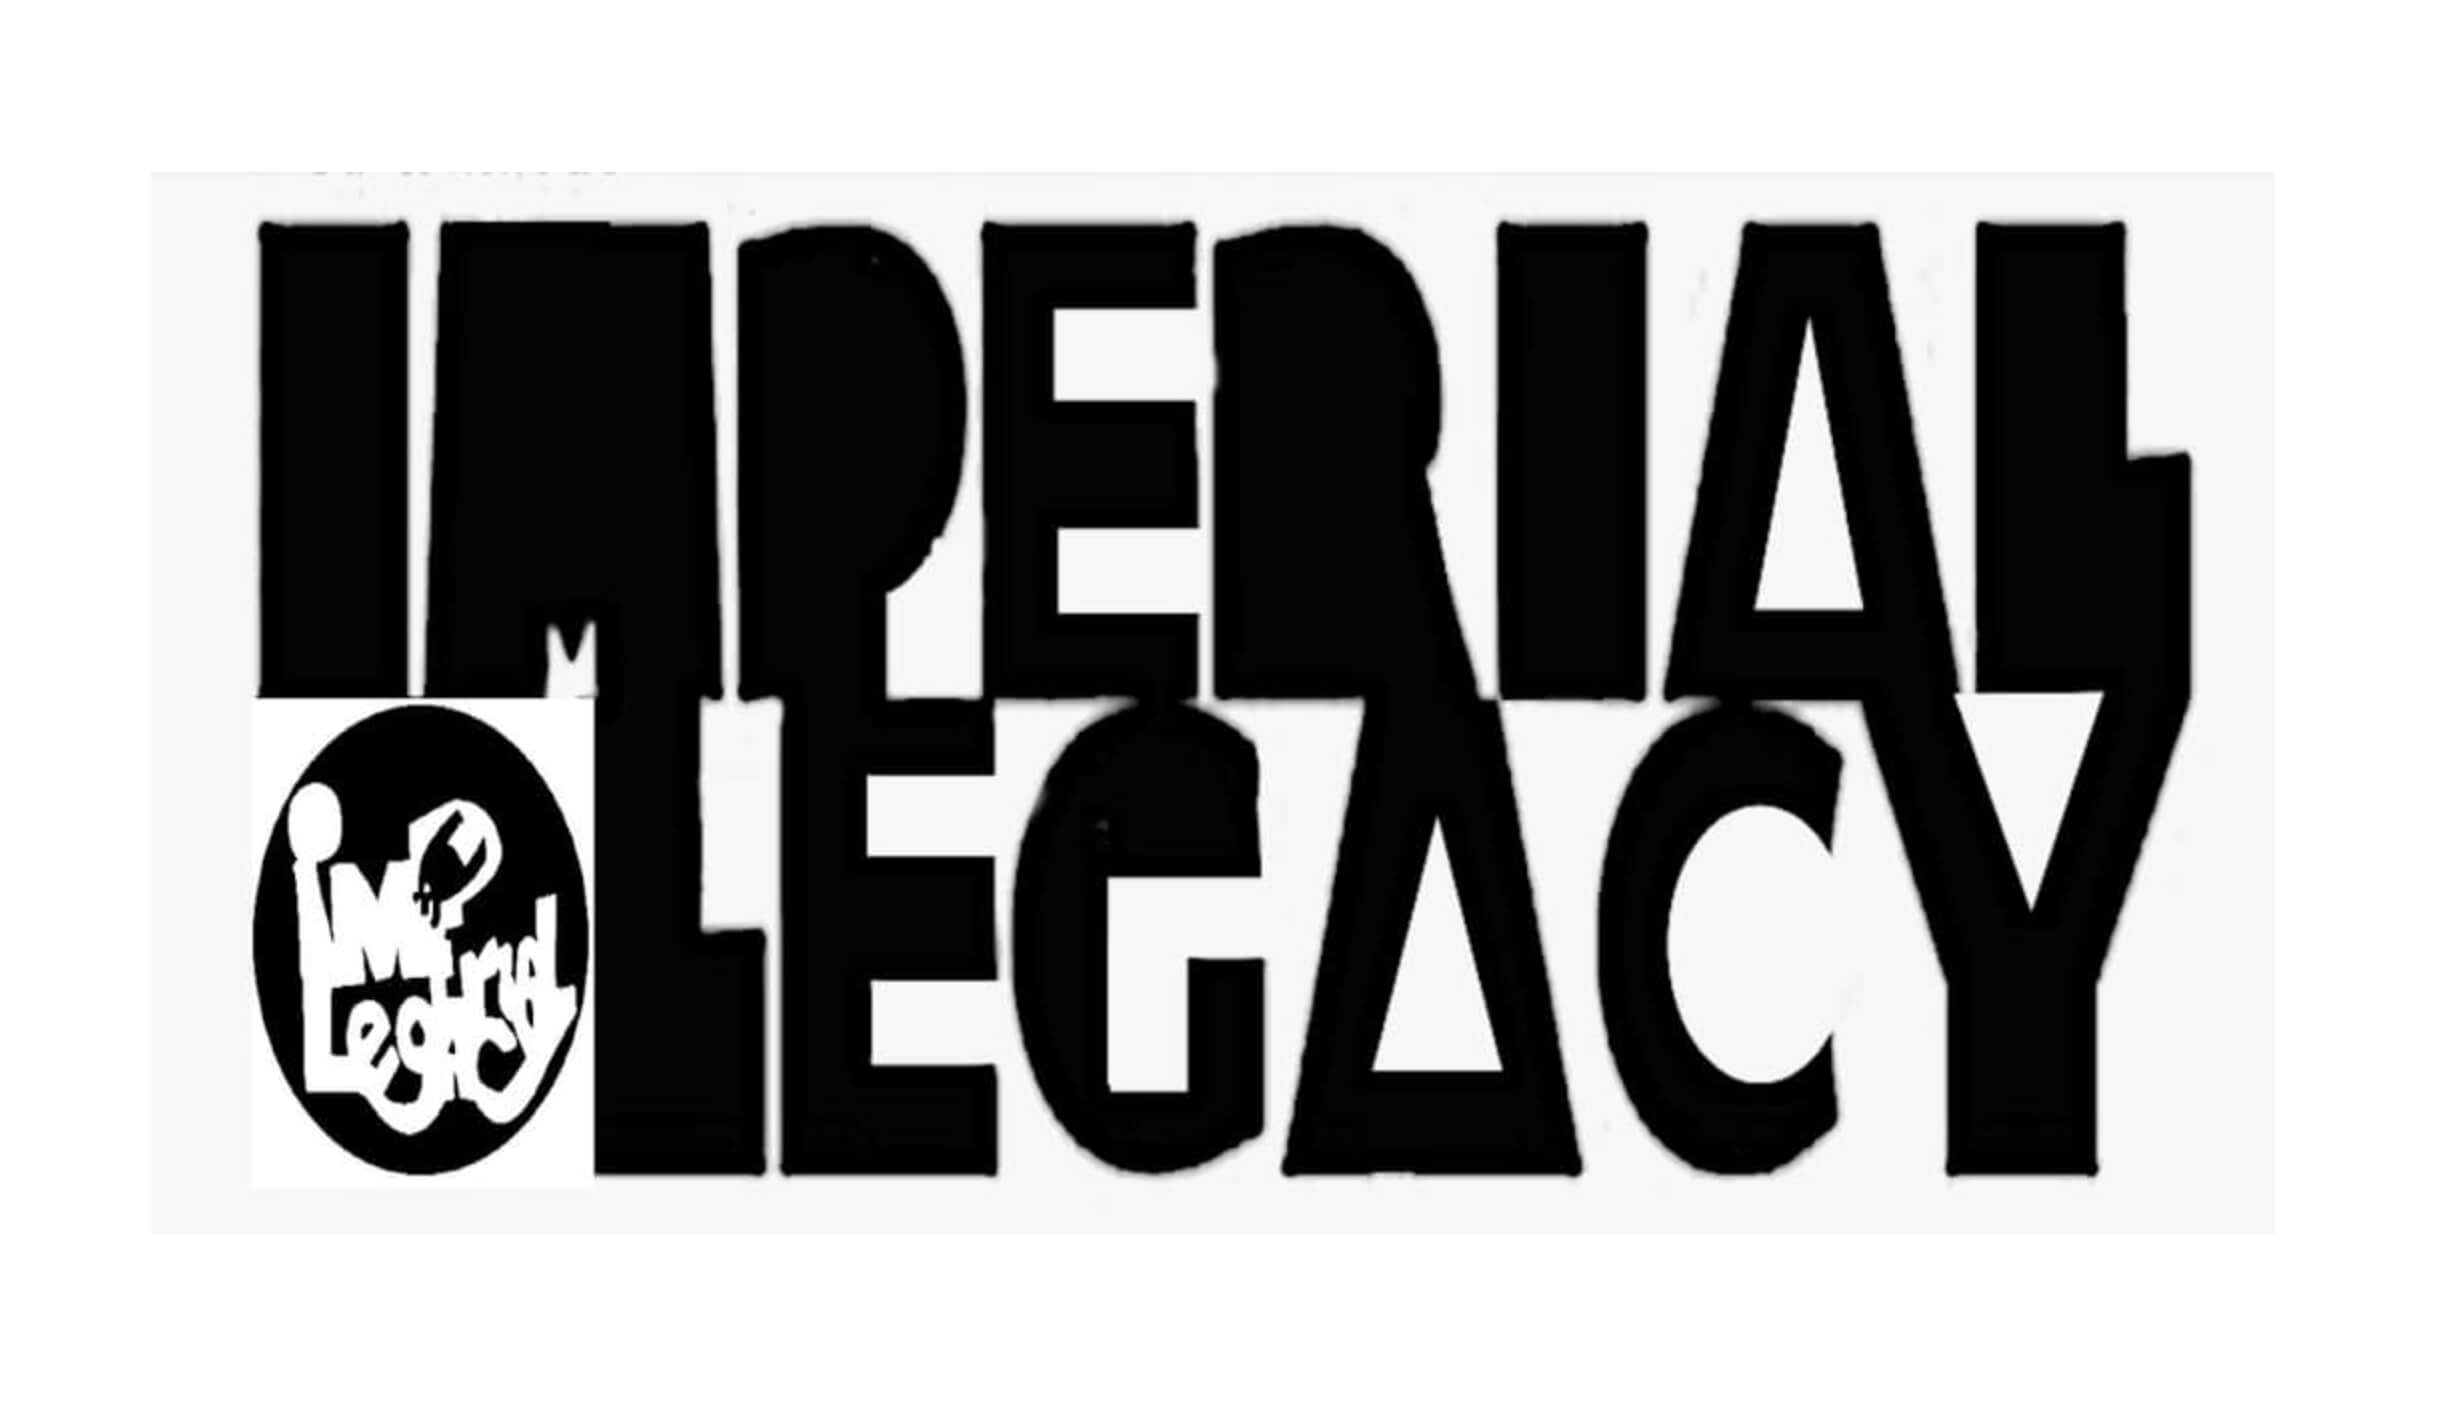 Made in Italy custom IMPERIAL LEGACY brand